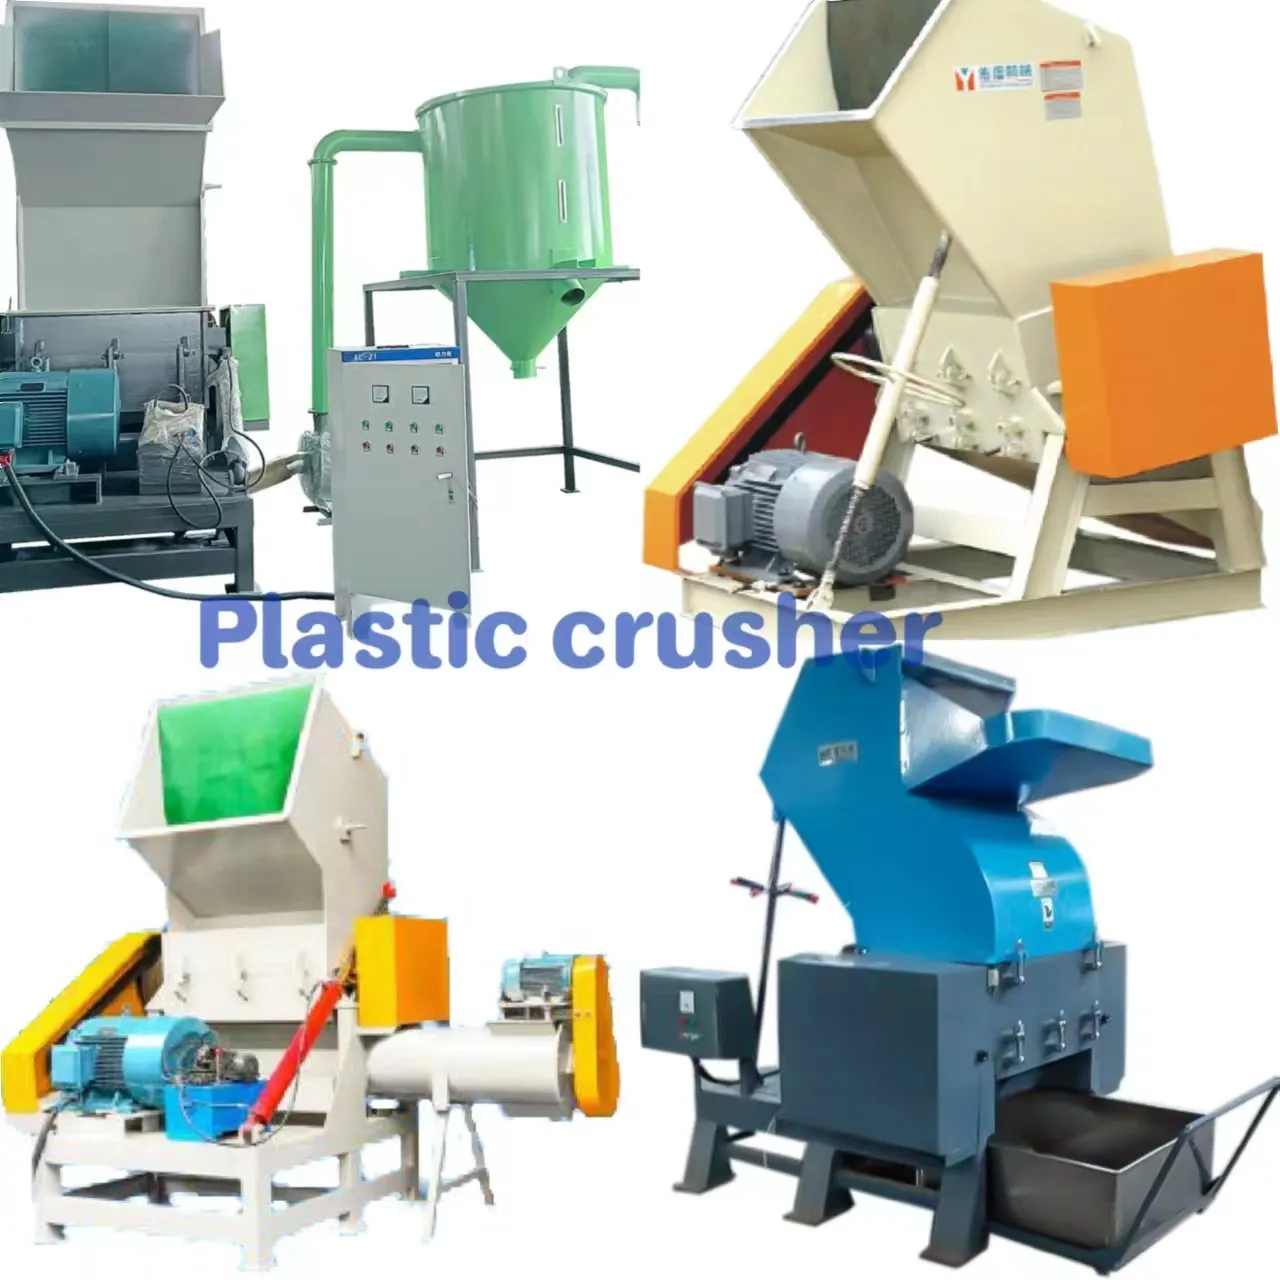 Introducing the Revolutionary Plastic Crusher: A Sustainable Solution for Waste Reduction